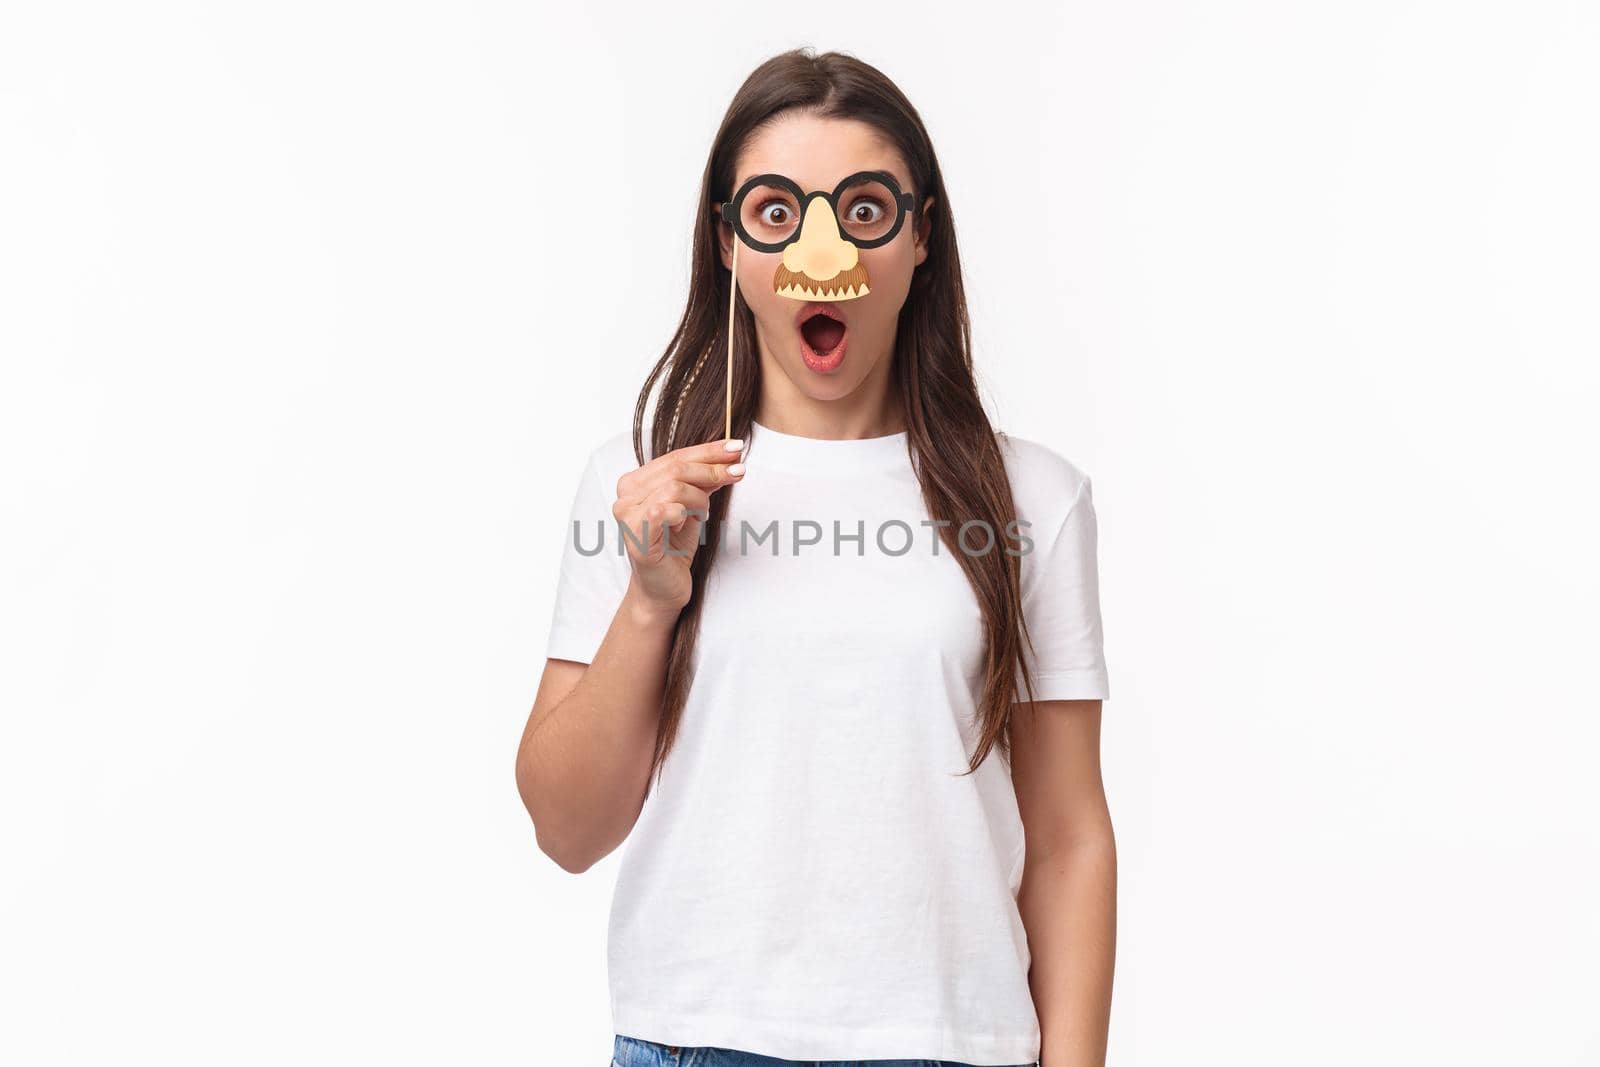 Entertainment, fun and holidays concept. Funny and cute young girl fool around, praying wearing glasses and nose mask, gasping amazed, look surprised standing white background.